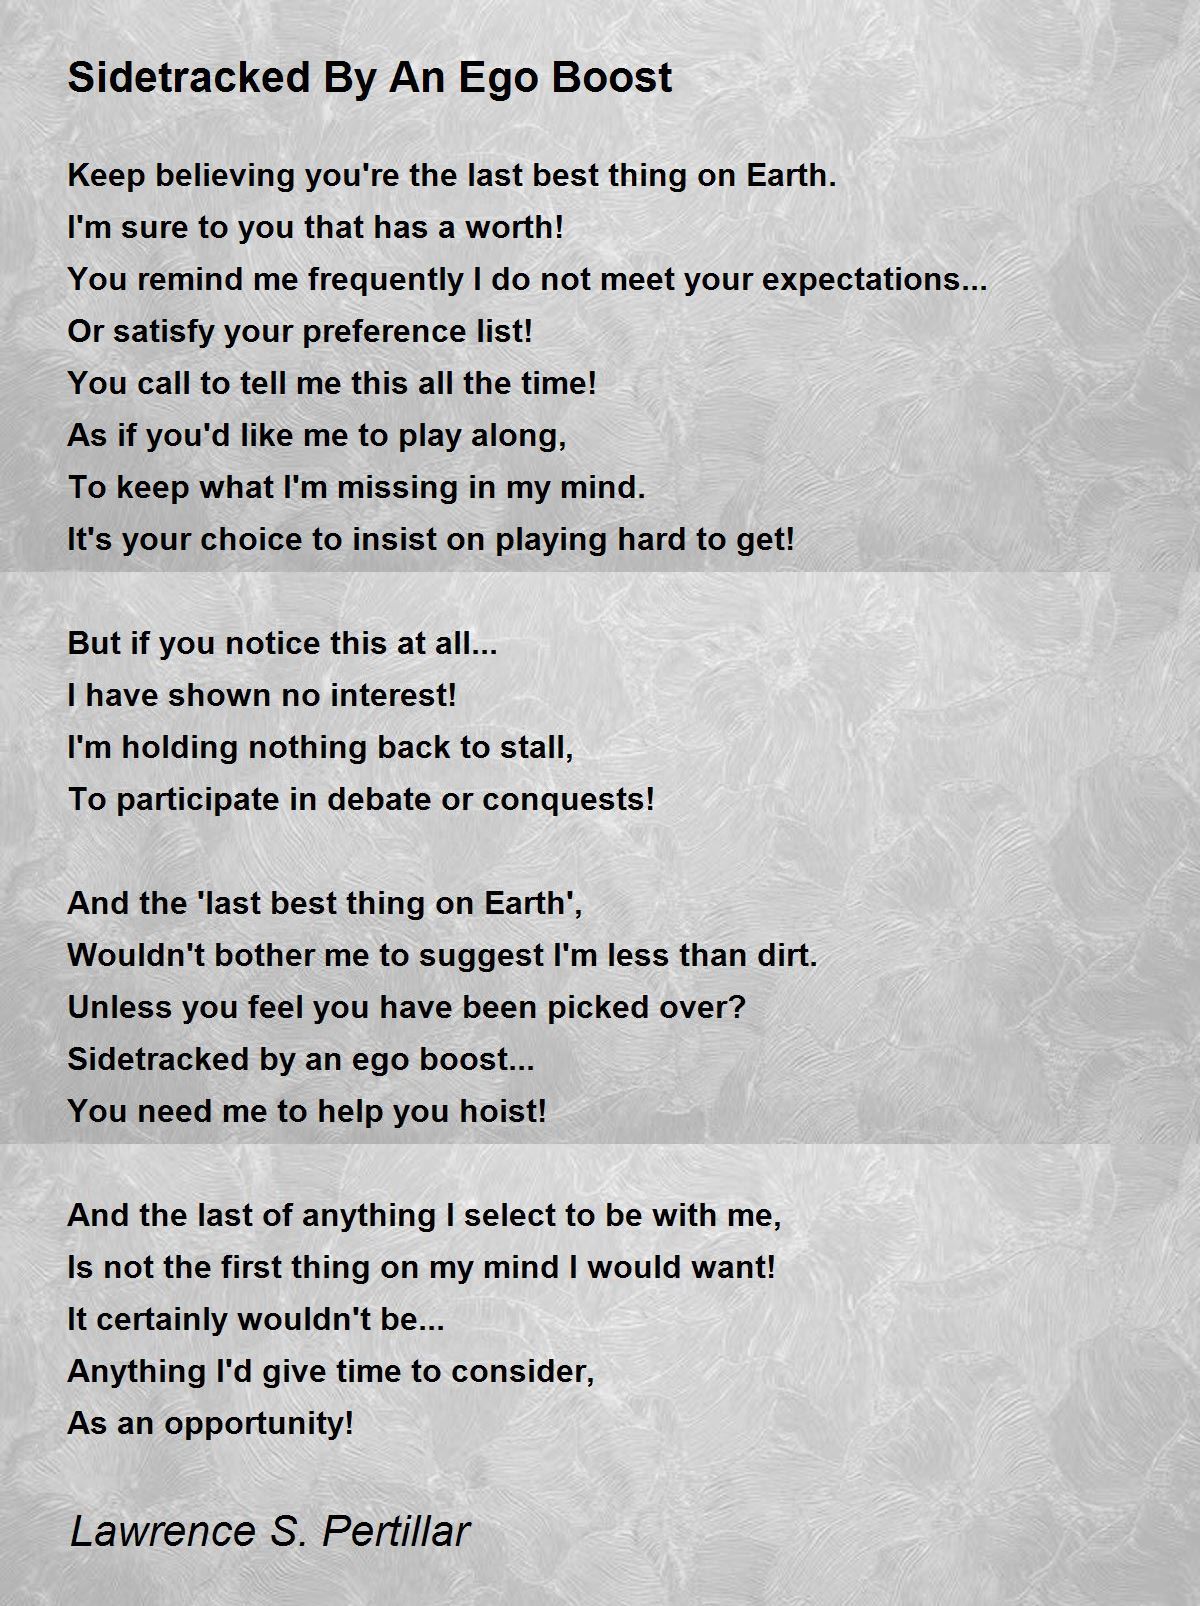 Sidetracked By An Ego Boost - Sidetracked By An Ego Boost Poem by